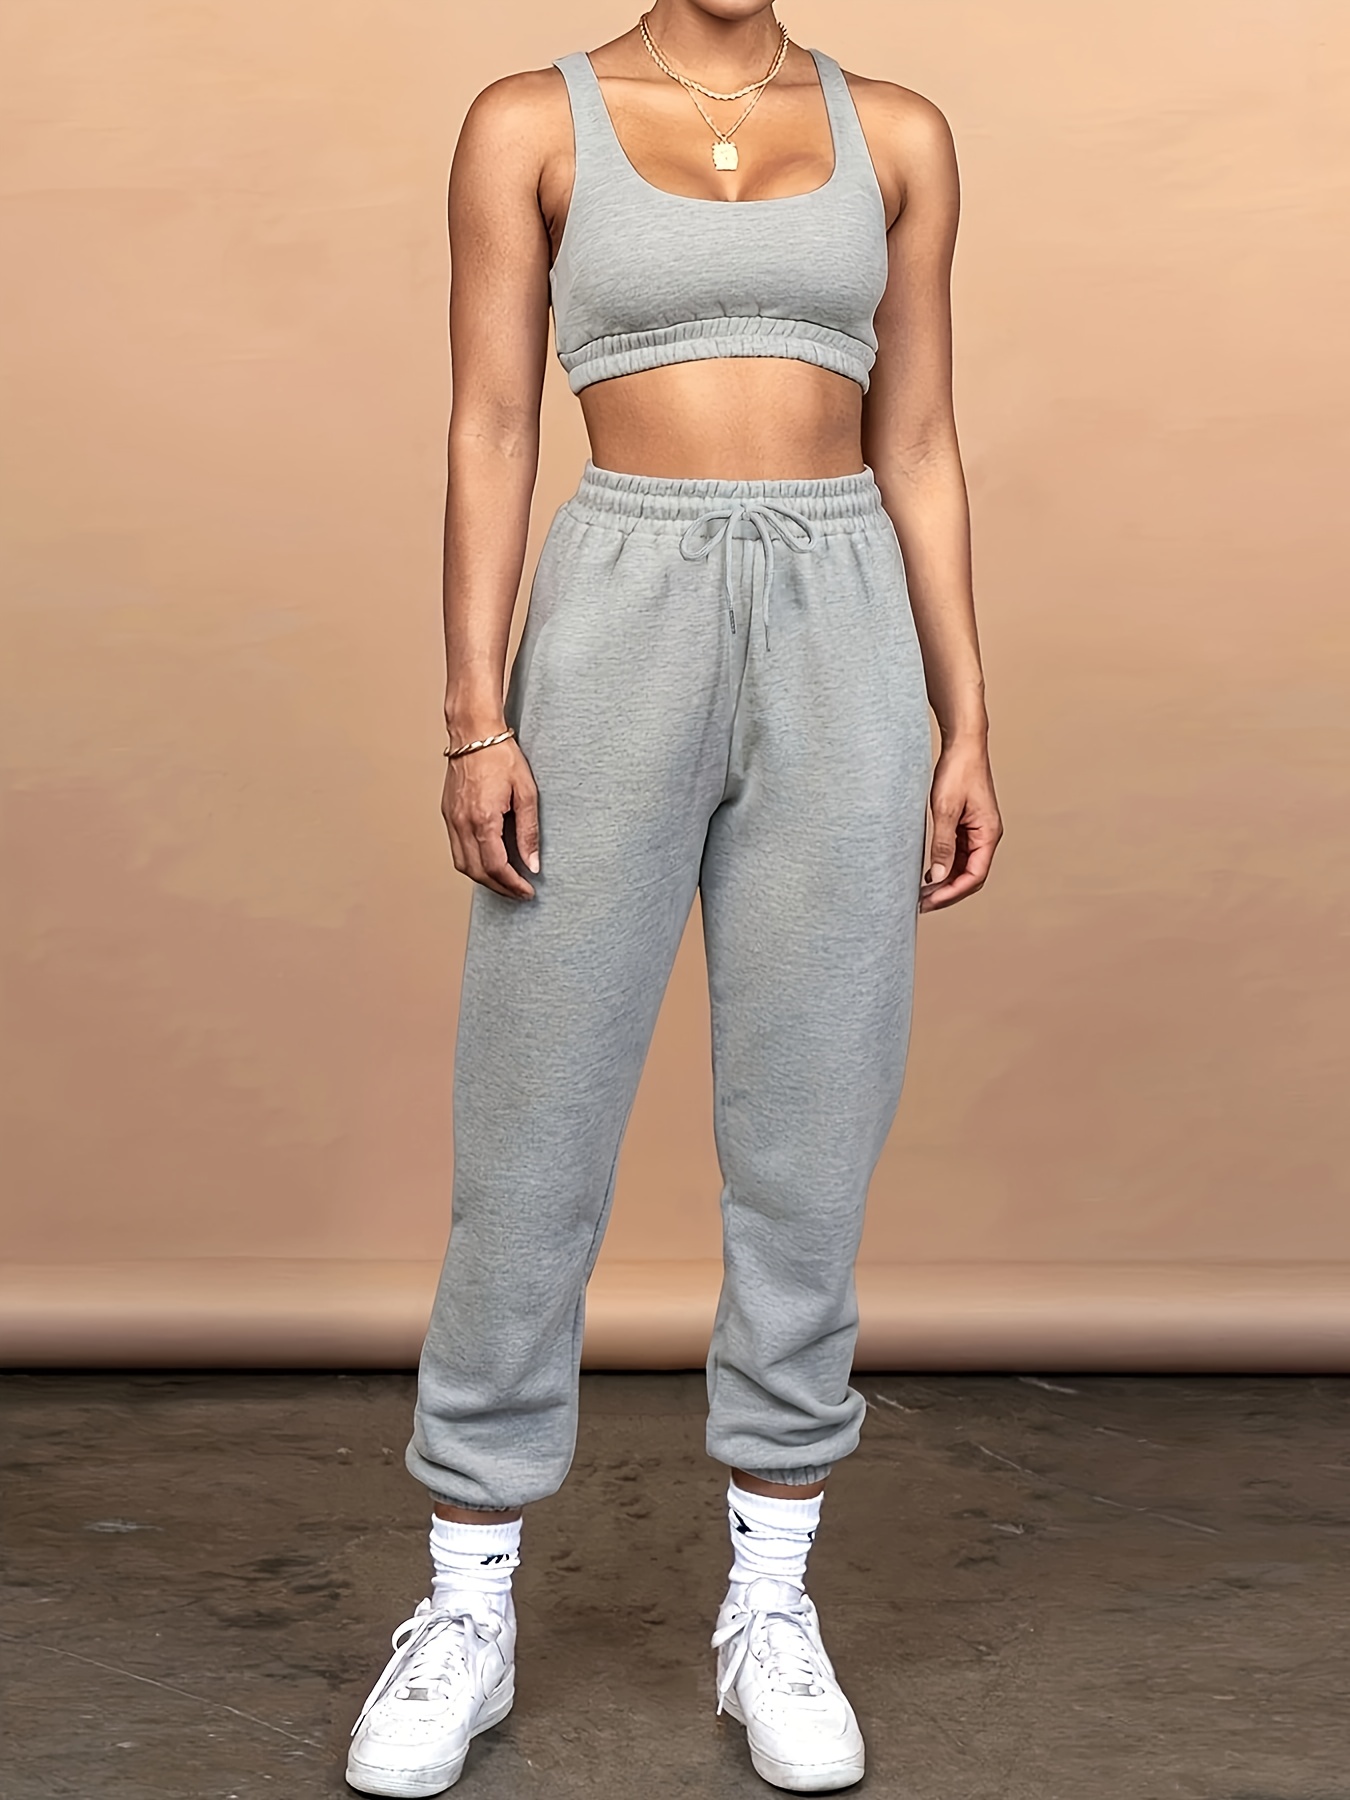 WAFFLE JOGGER  Tennis skirt outfit, Cute sweatpants outfit, Cute sweatpants